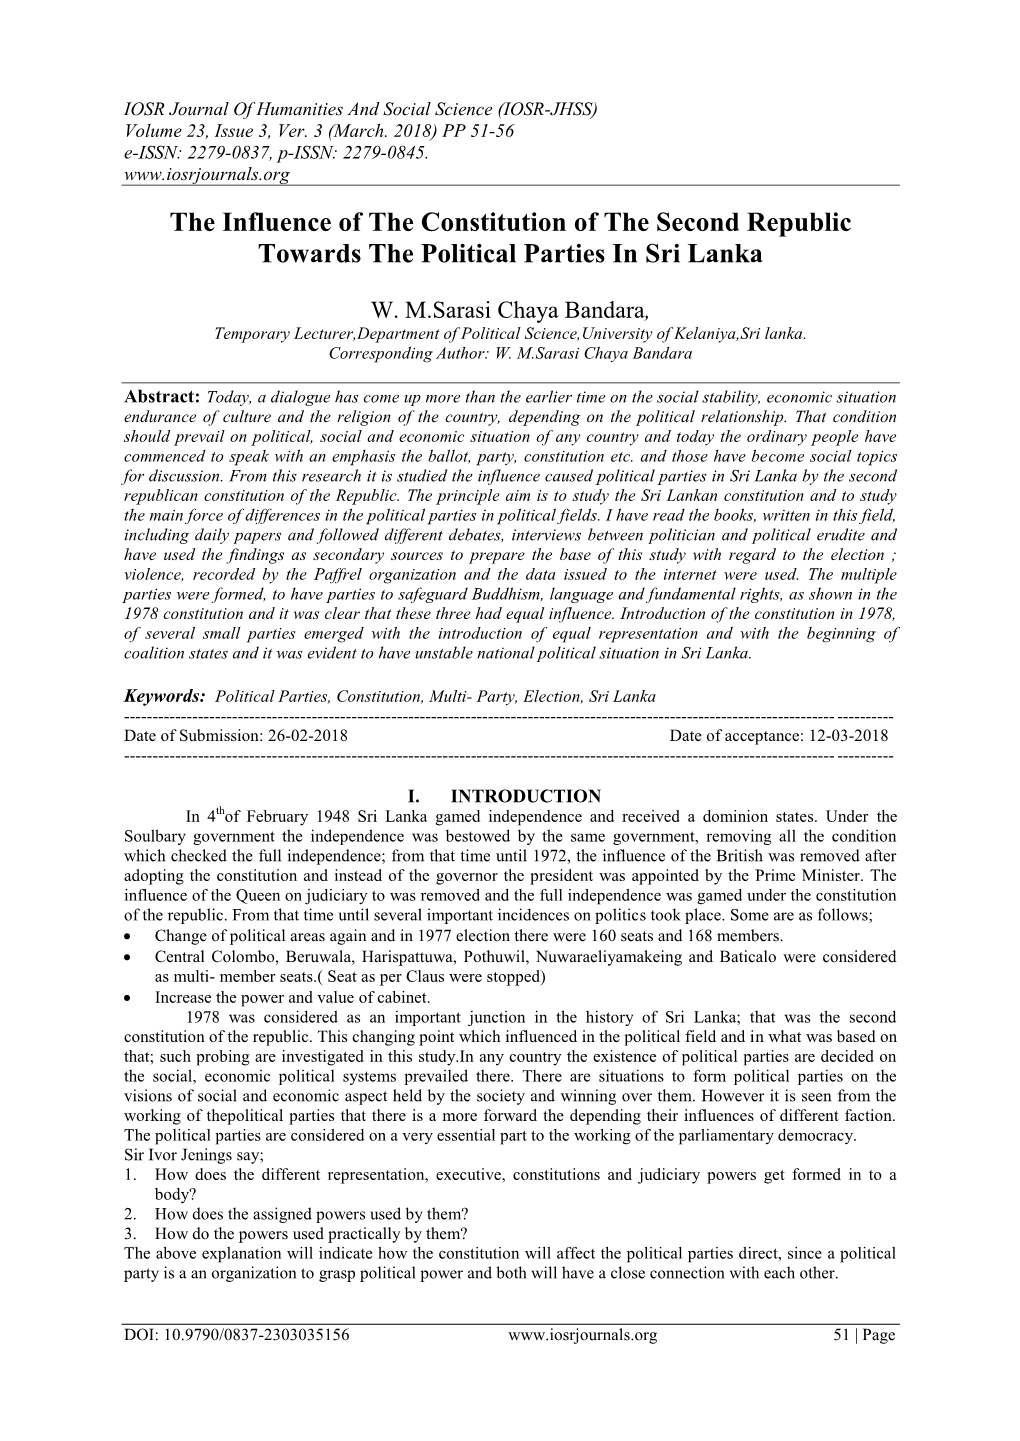 The Influence of the Constitution of the Second Republic Towards the Political Parties in Sri Lanka